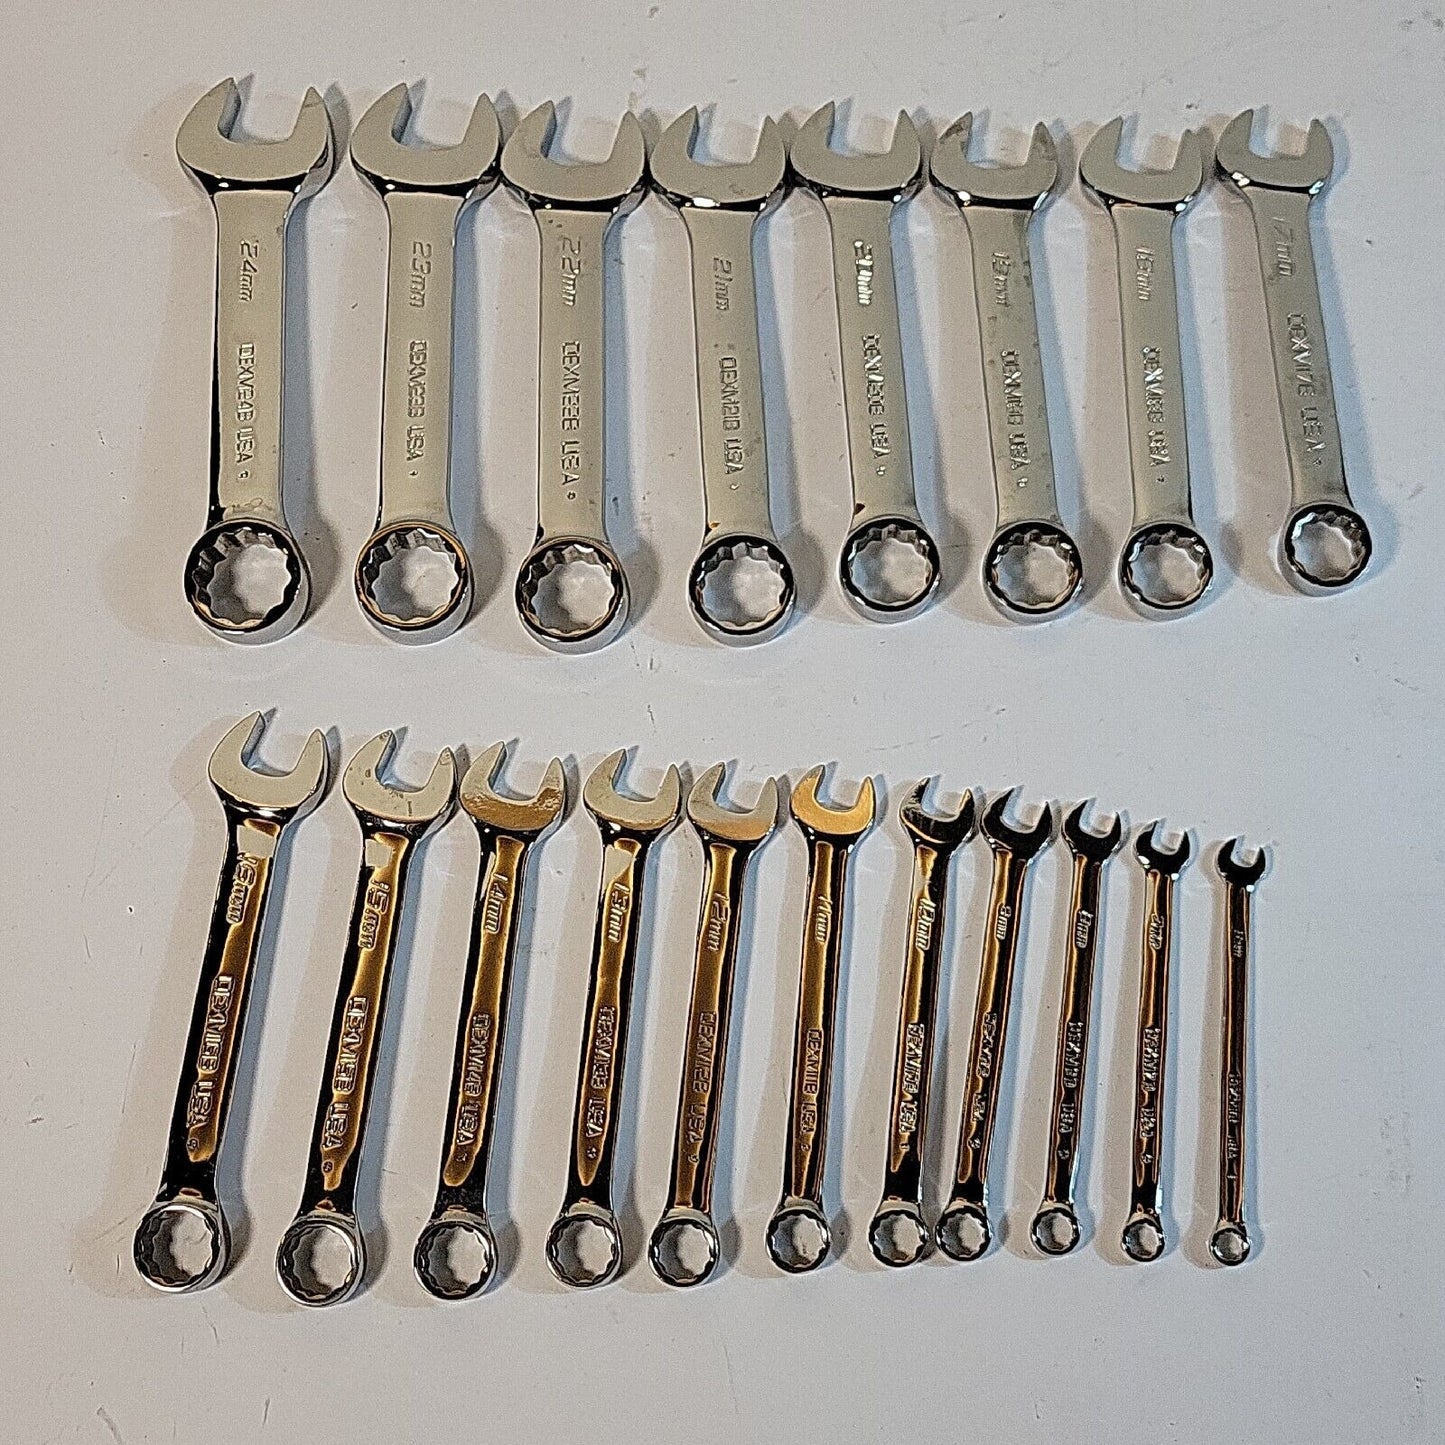 Snap-on 12-point Metric Flank Drive Short Comb Wrench 19 pc set 6mm to 24mm